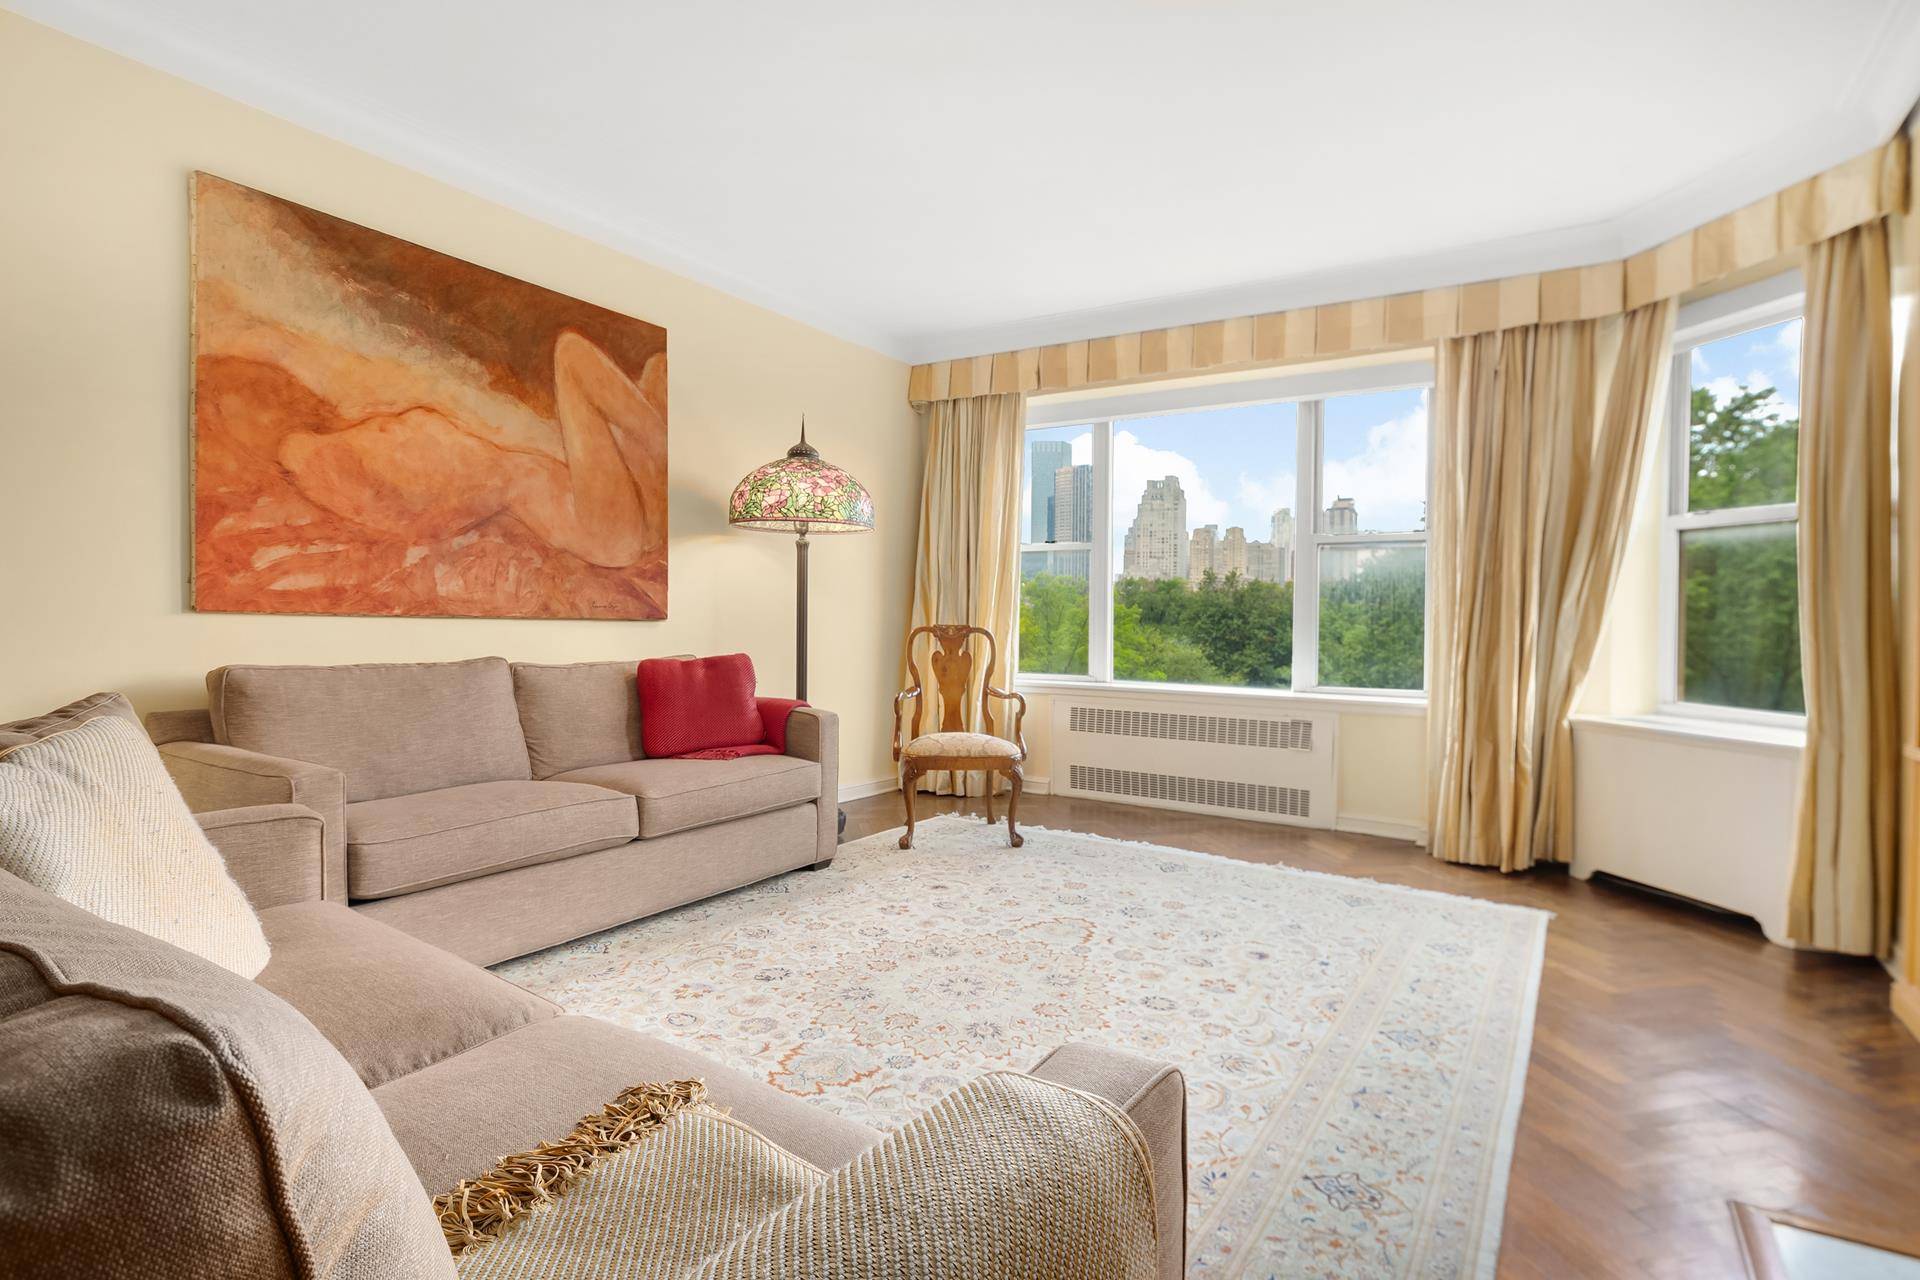 Sprawling 3 Bedroom Home Perched Above and Overlooking Fifth Avenue amp ; Central ParkThis elegant and spacious apartment opens to a charming gallery complimented by a powder room.